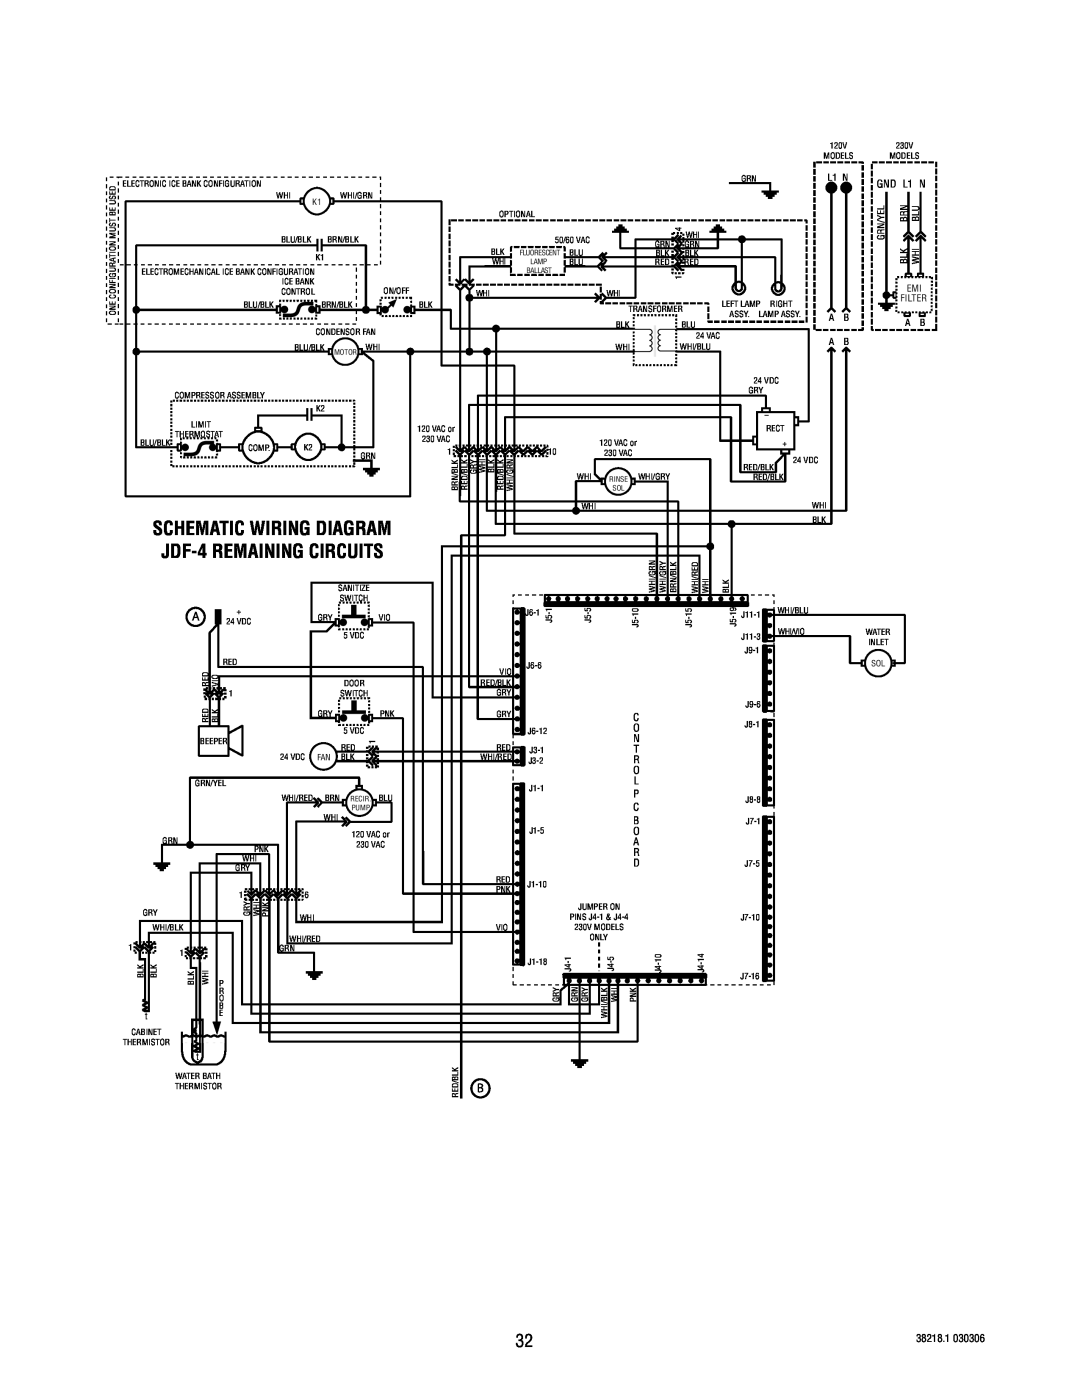 Bunn S/N 0005473 & UP manual Fluorescent, Ballast, SCHEMATIC WIRING DIAGRAM JDF-4 REMAINING CIRCUITS 